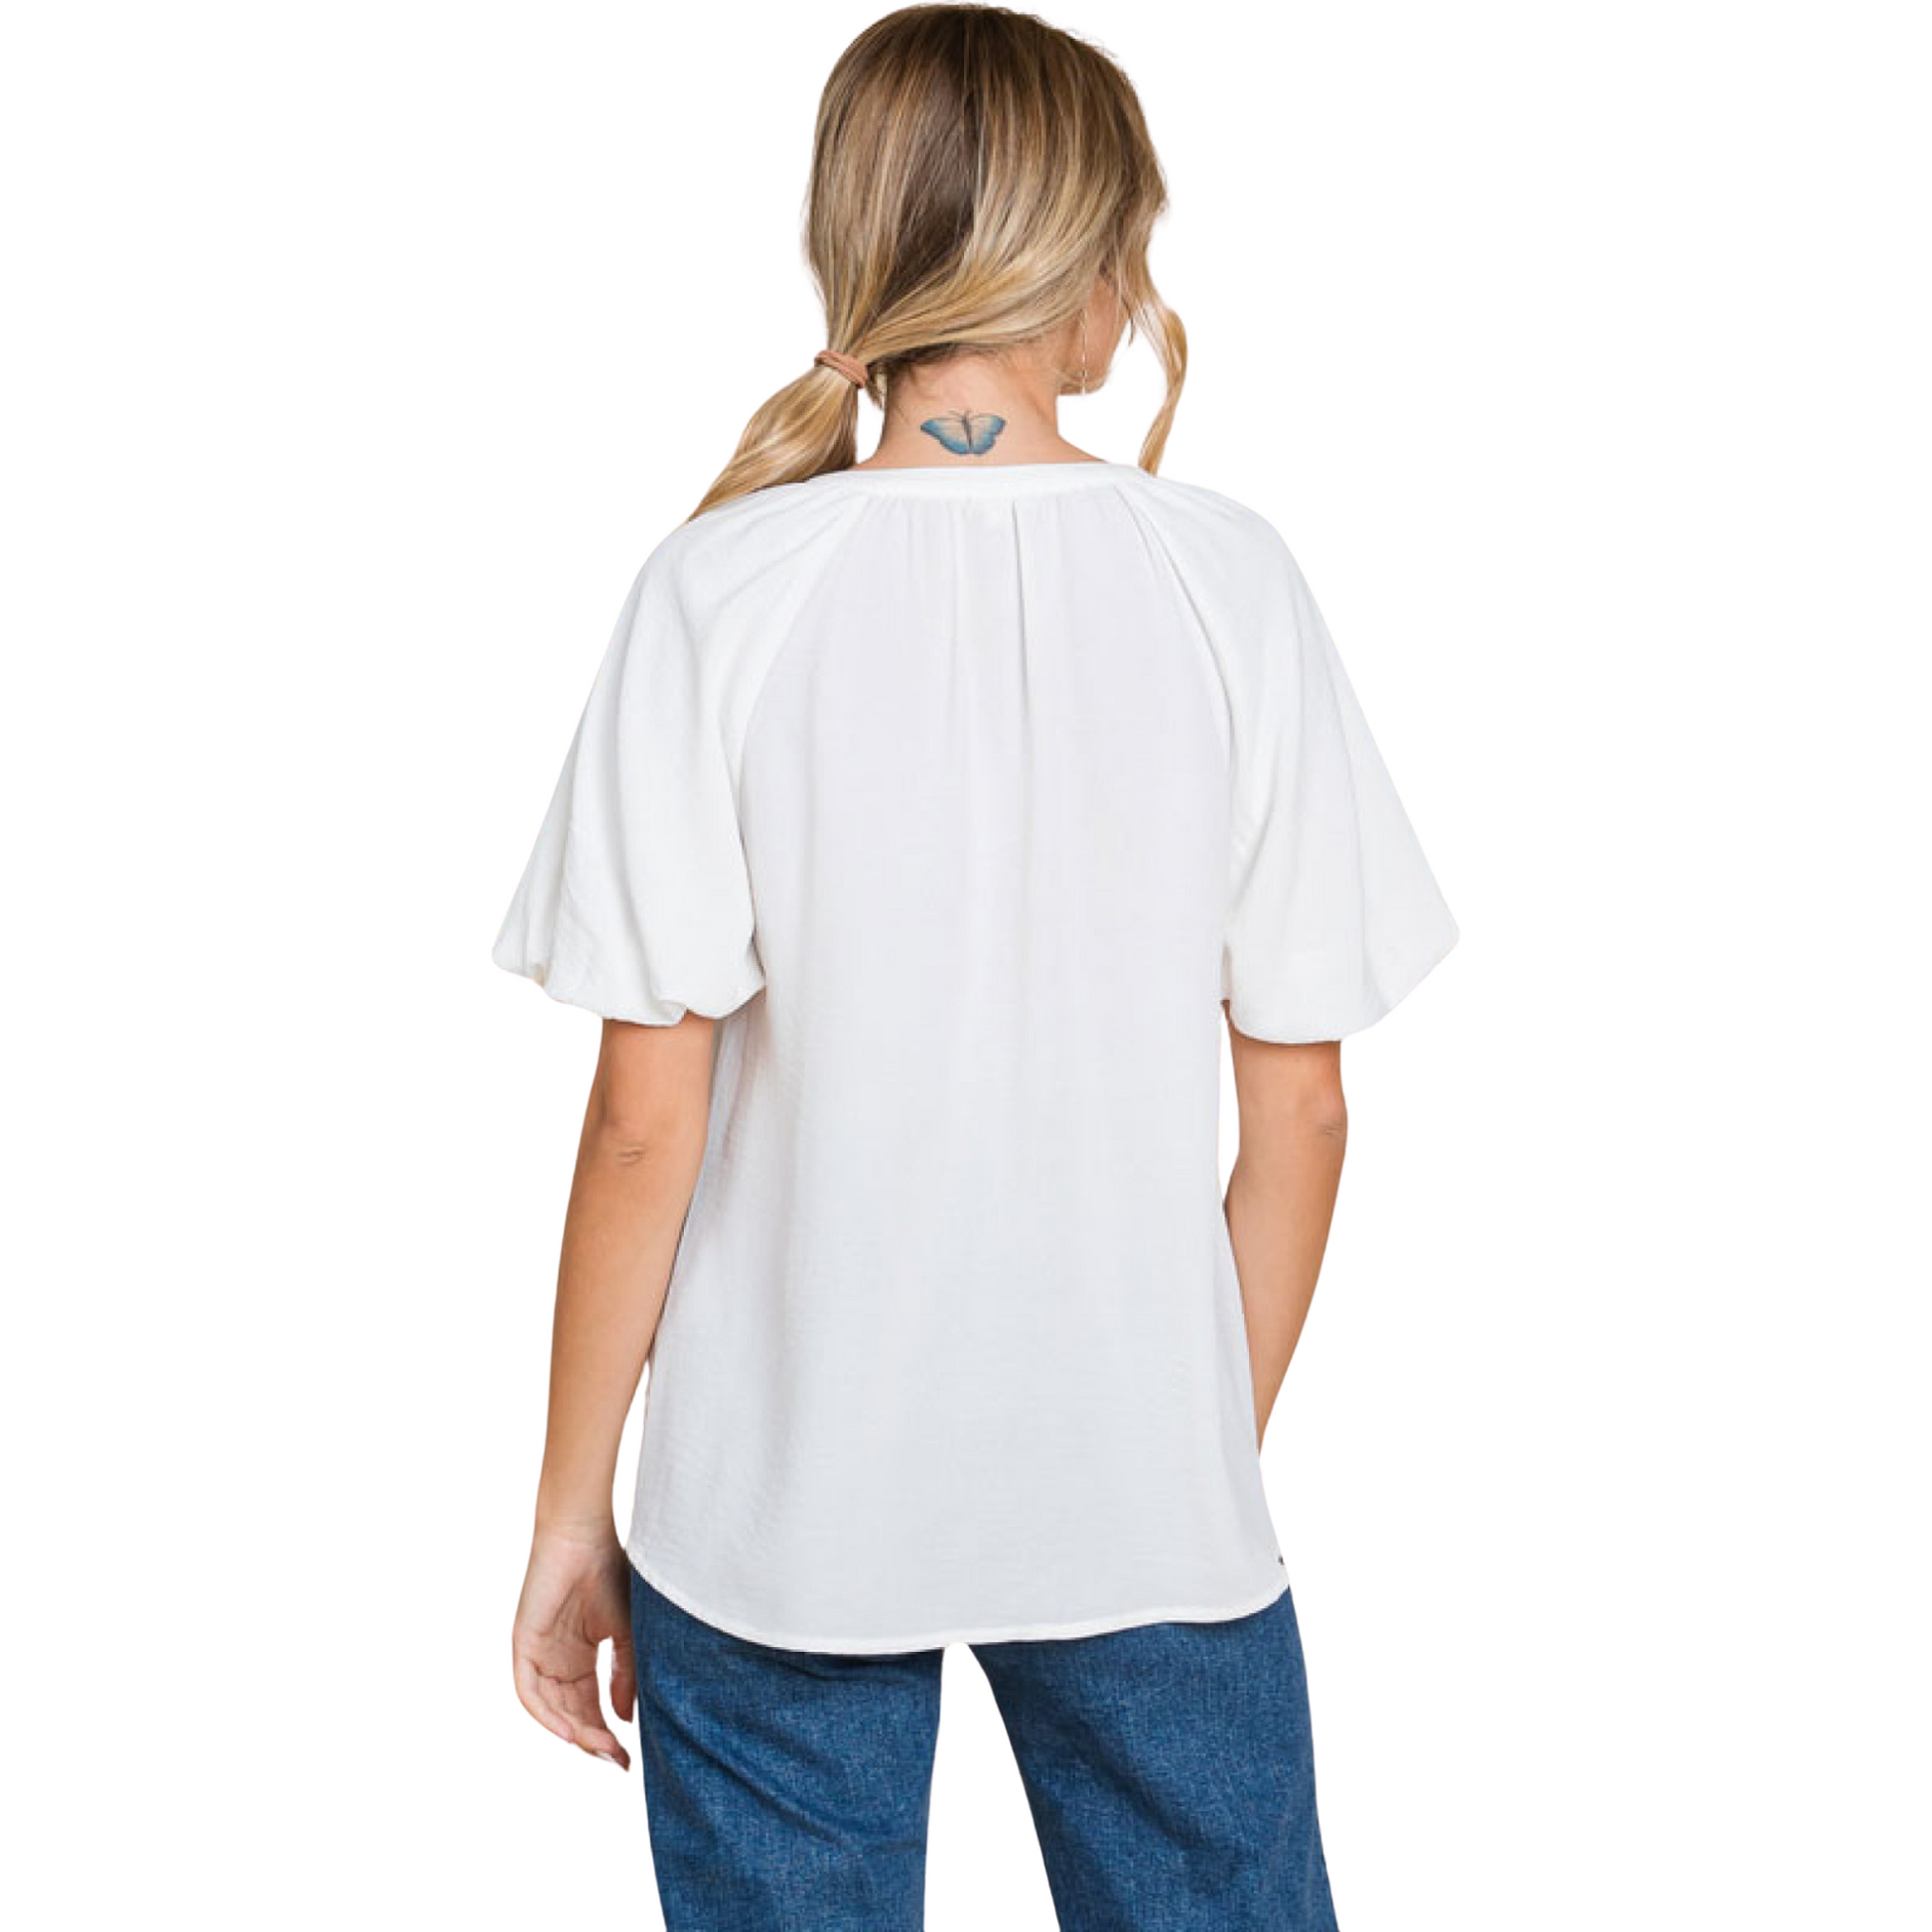 The Balloon Sleeve Top in off white features a v neck design and trendy bubble sleeves. With a sophisticated and versatile style, this top is perfect for any occasion. Enhance your wardrobe with this must-have fashion piece.